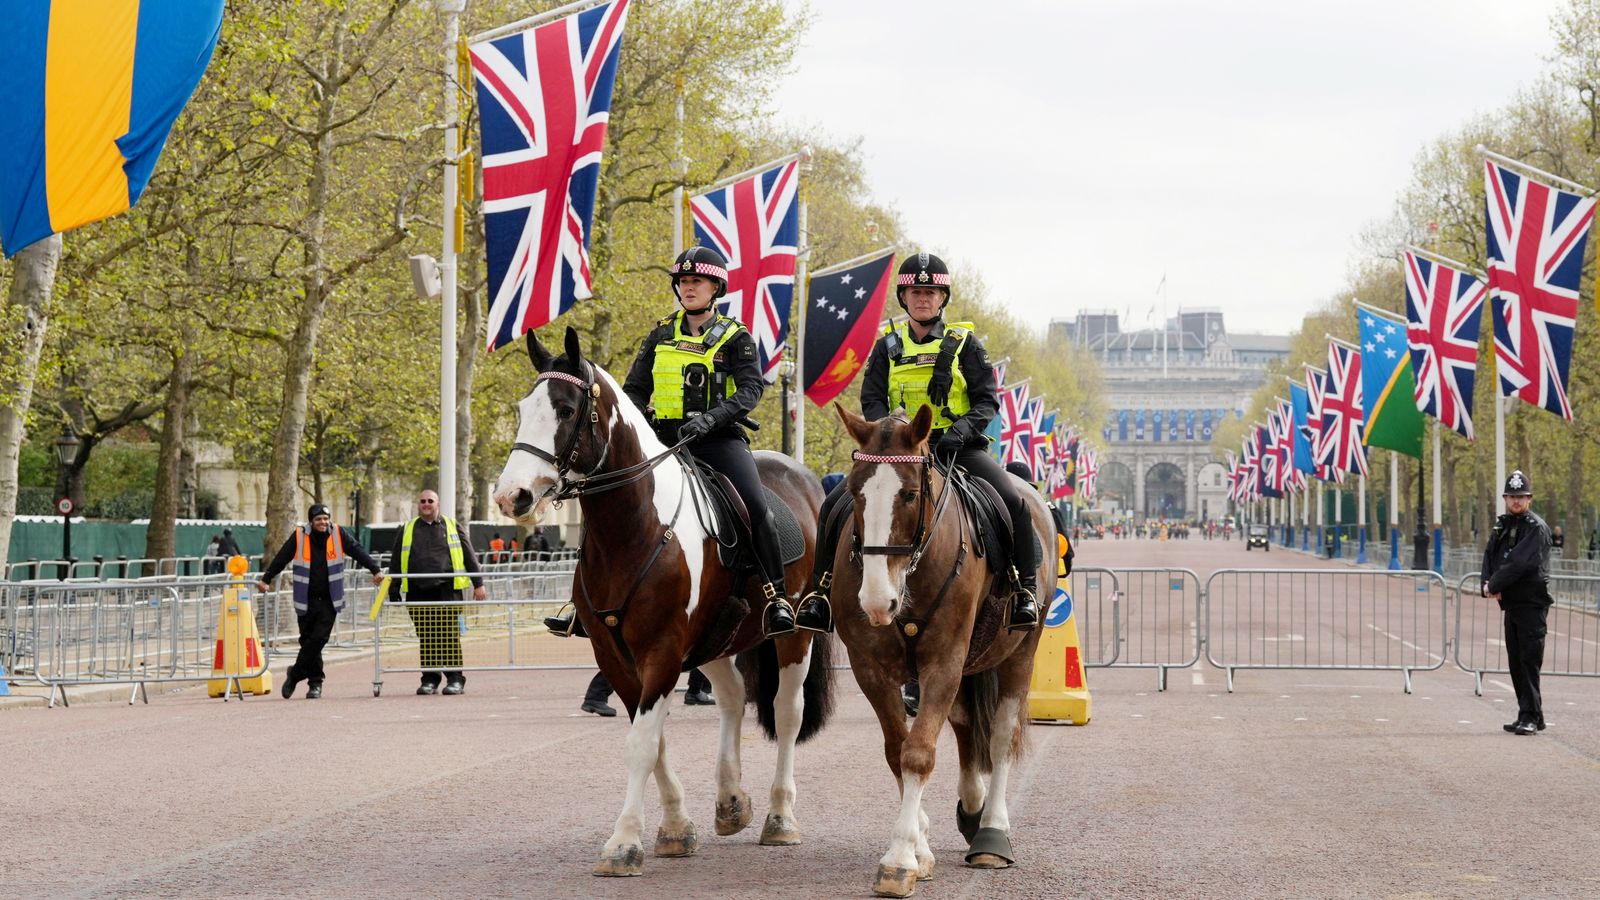 Snipers, facial recognition and a bomb-proof nerve centre - huge coronation security in place as police get new powers to tackle disruption